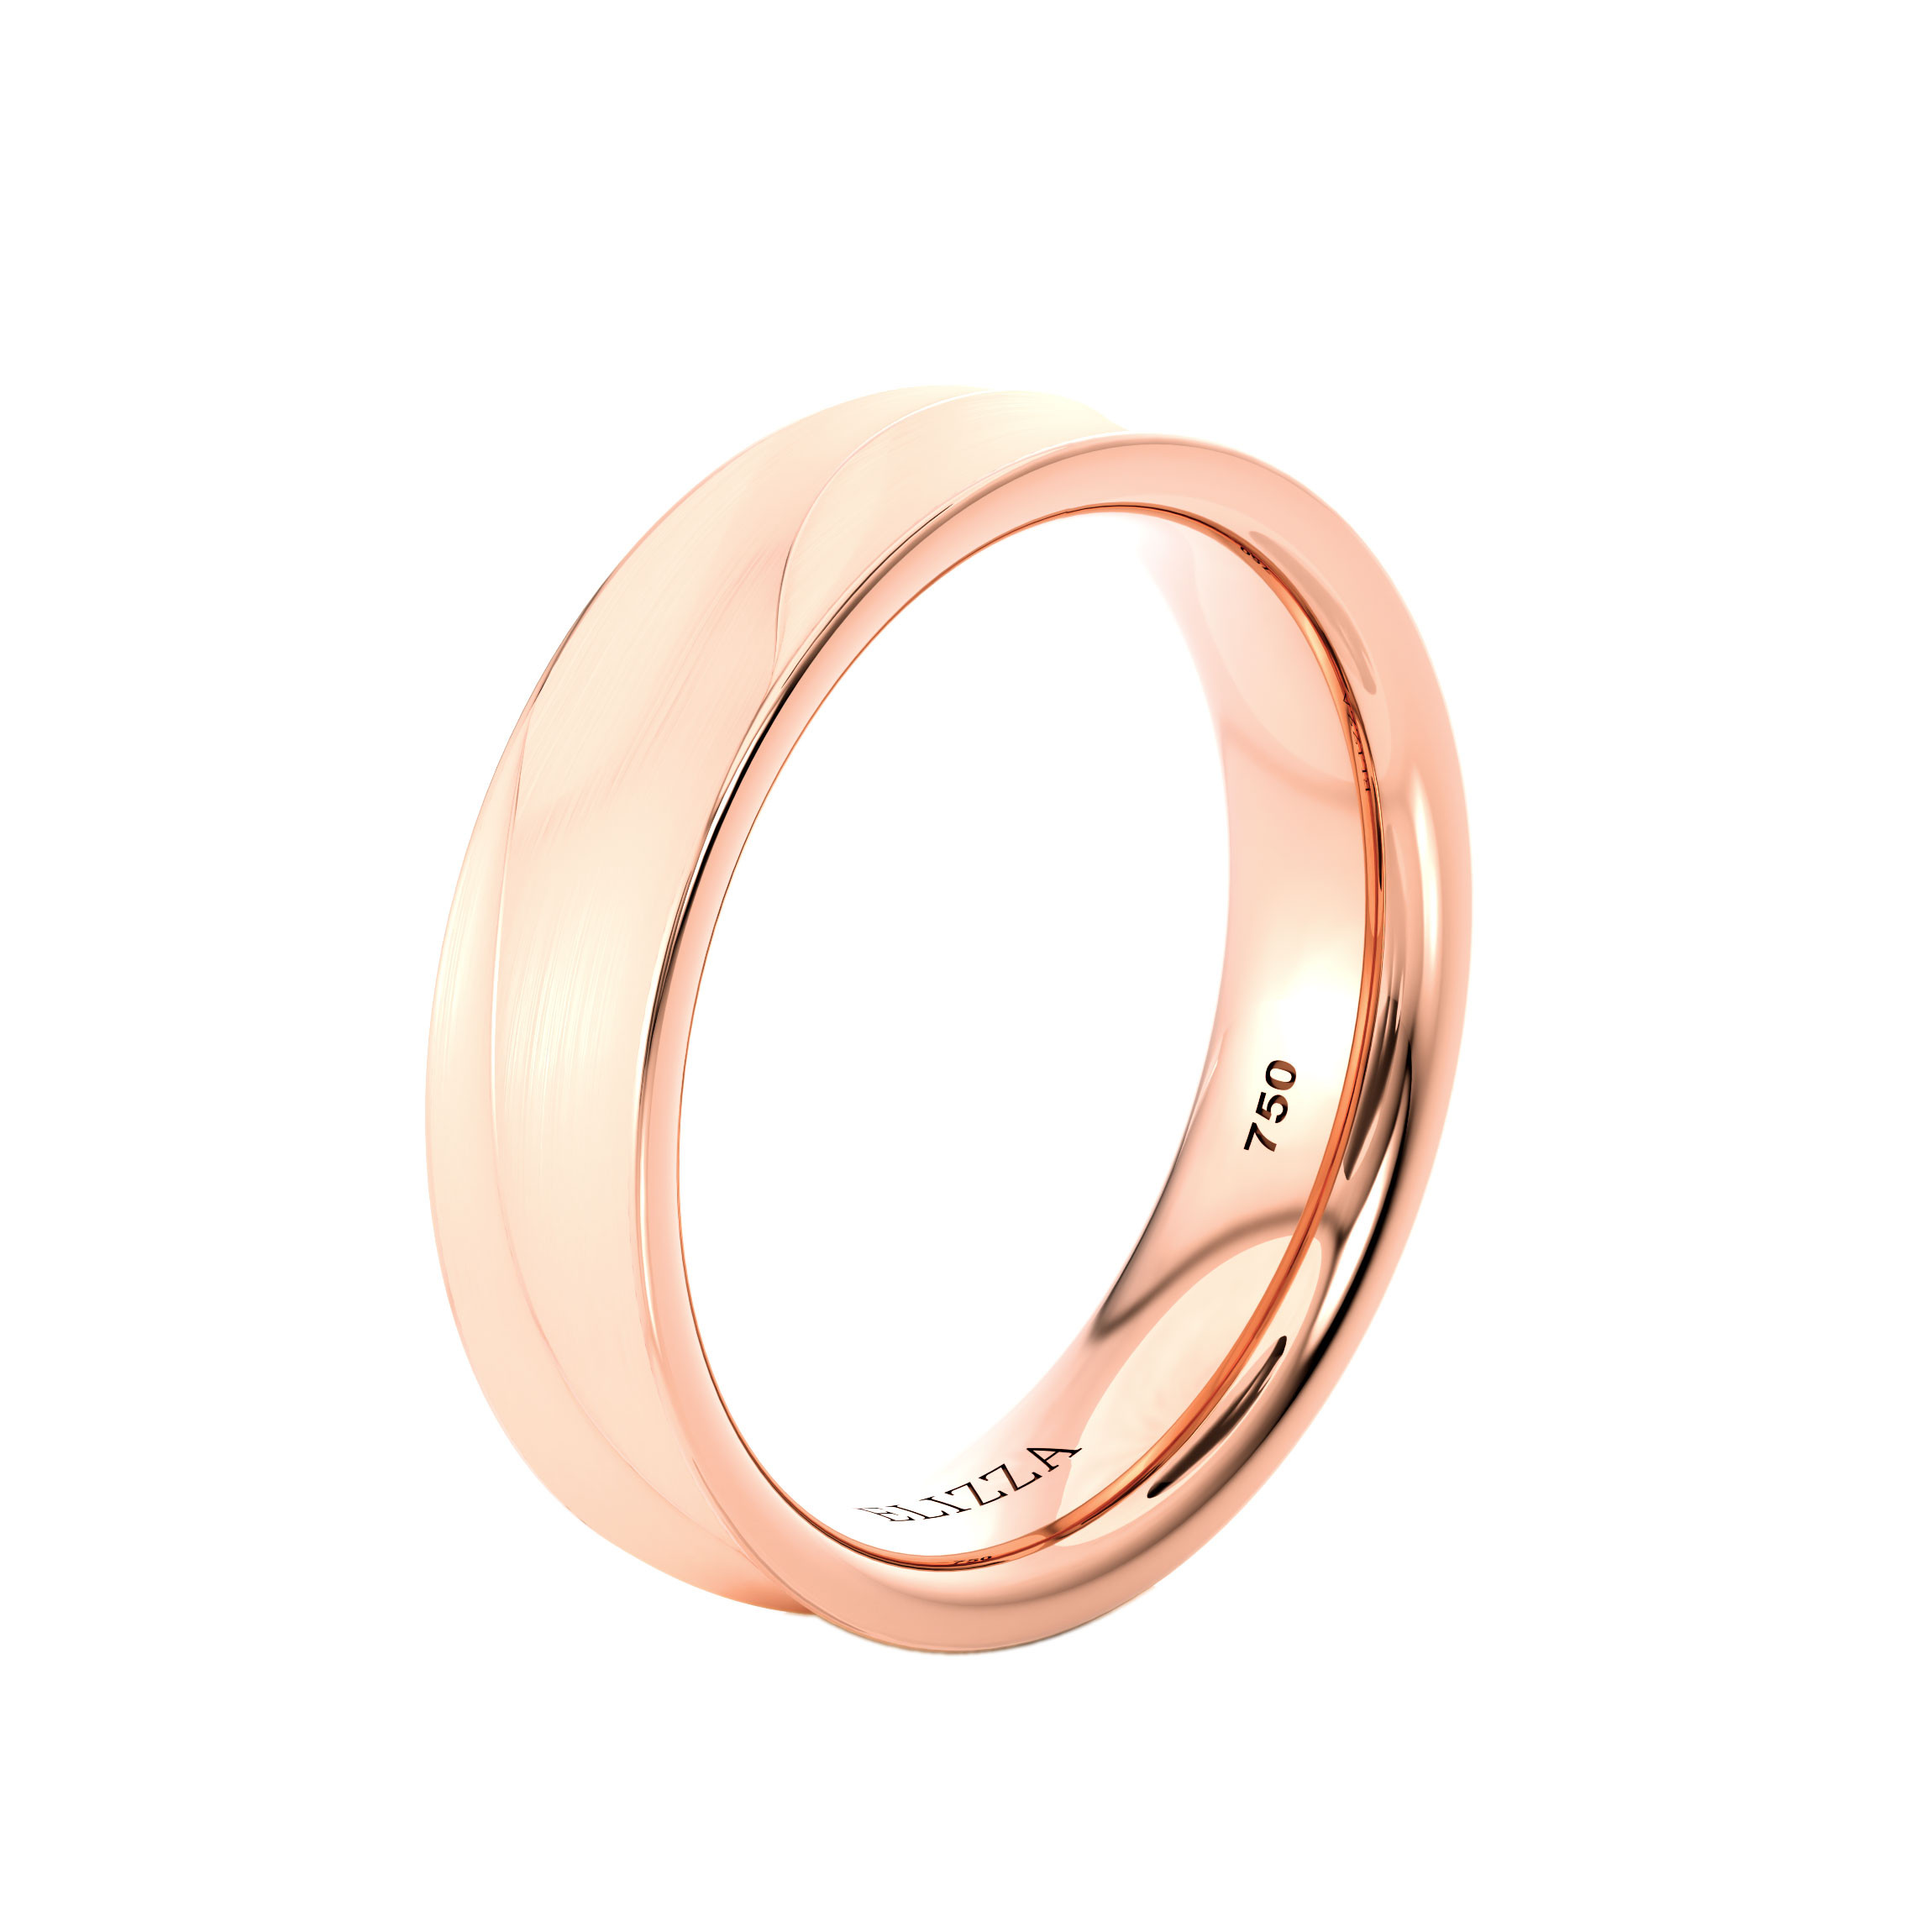 Trauring Enzo Couple | 14K Roségold 5